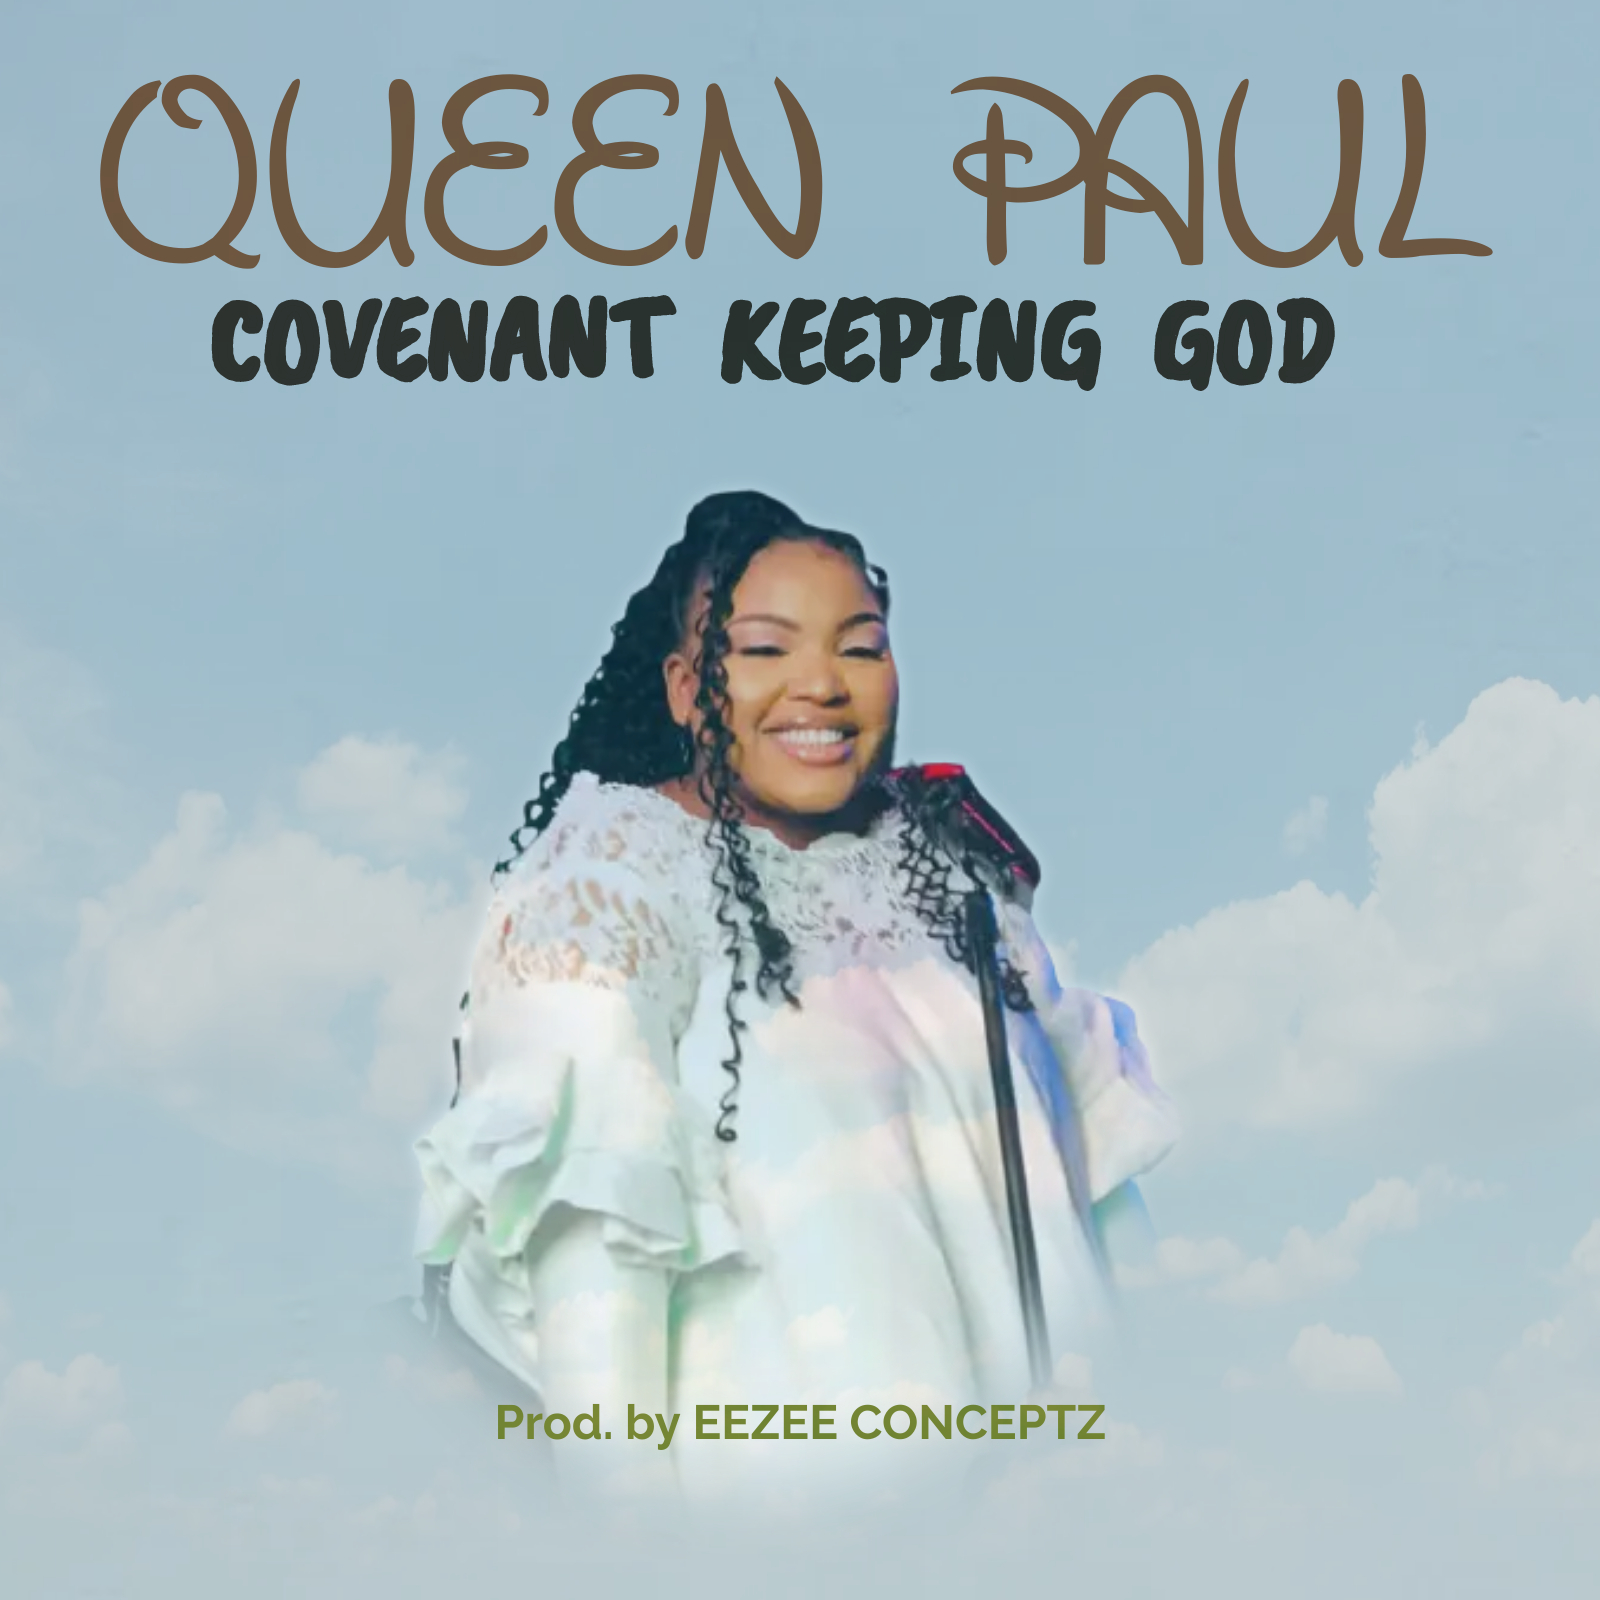 Queen Paul unleashed this soundtrack labeled Covenant Keeping God as the first song of the year 2023. Stream and Download mp3 here